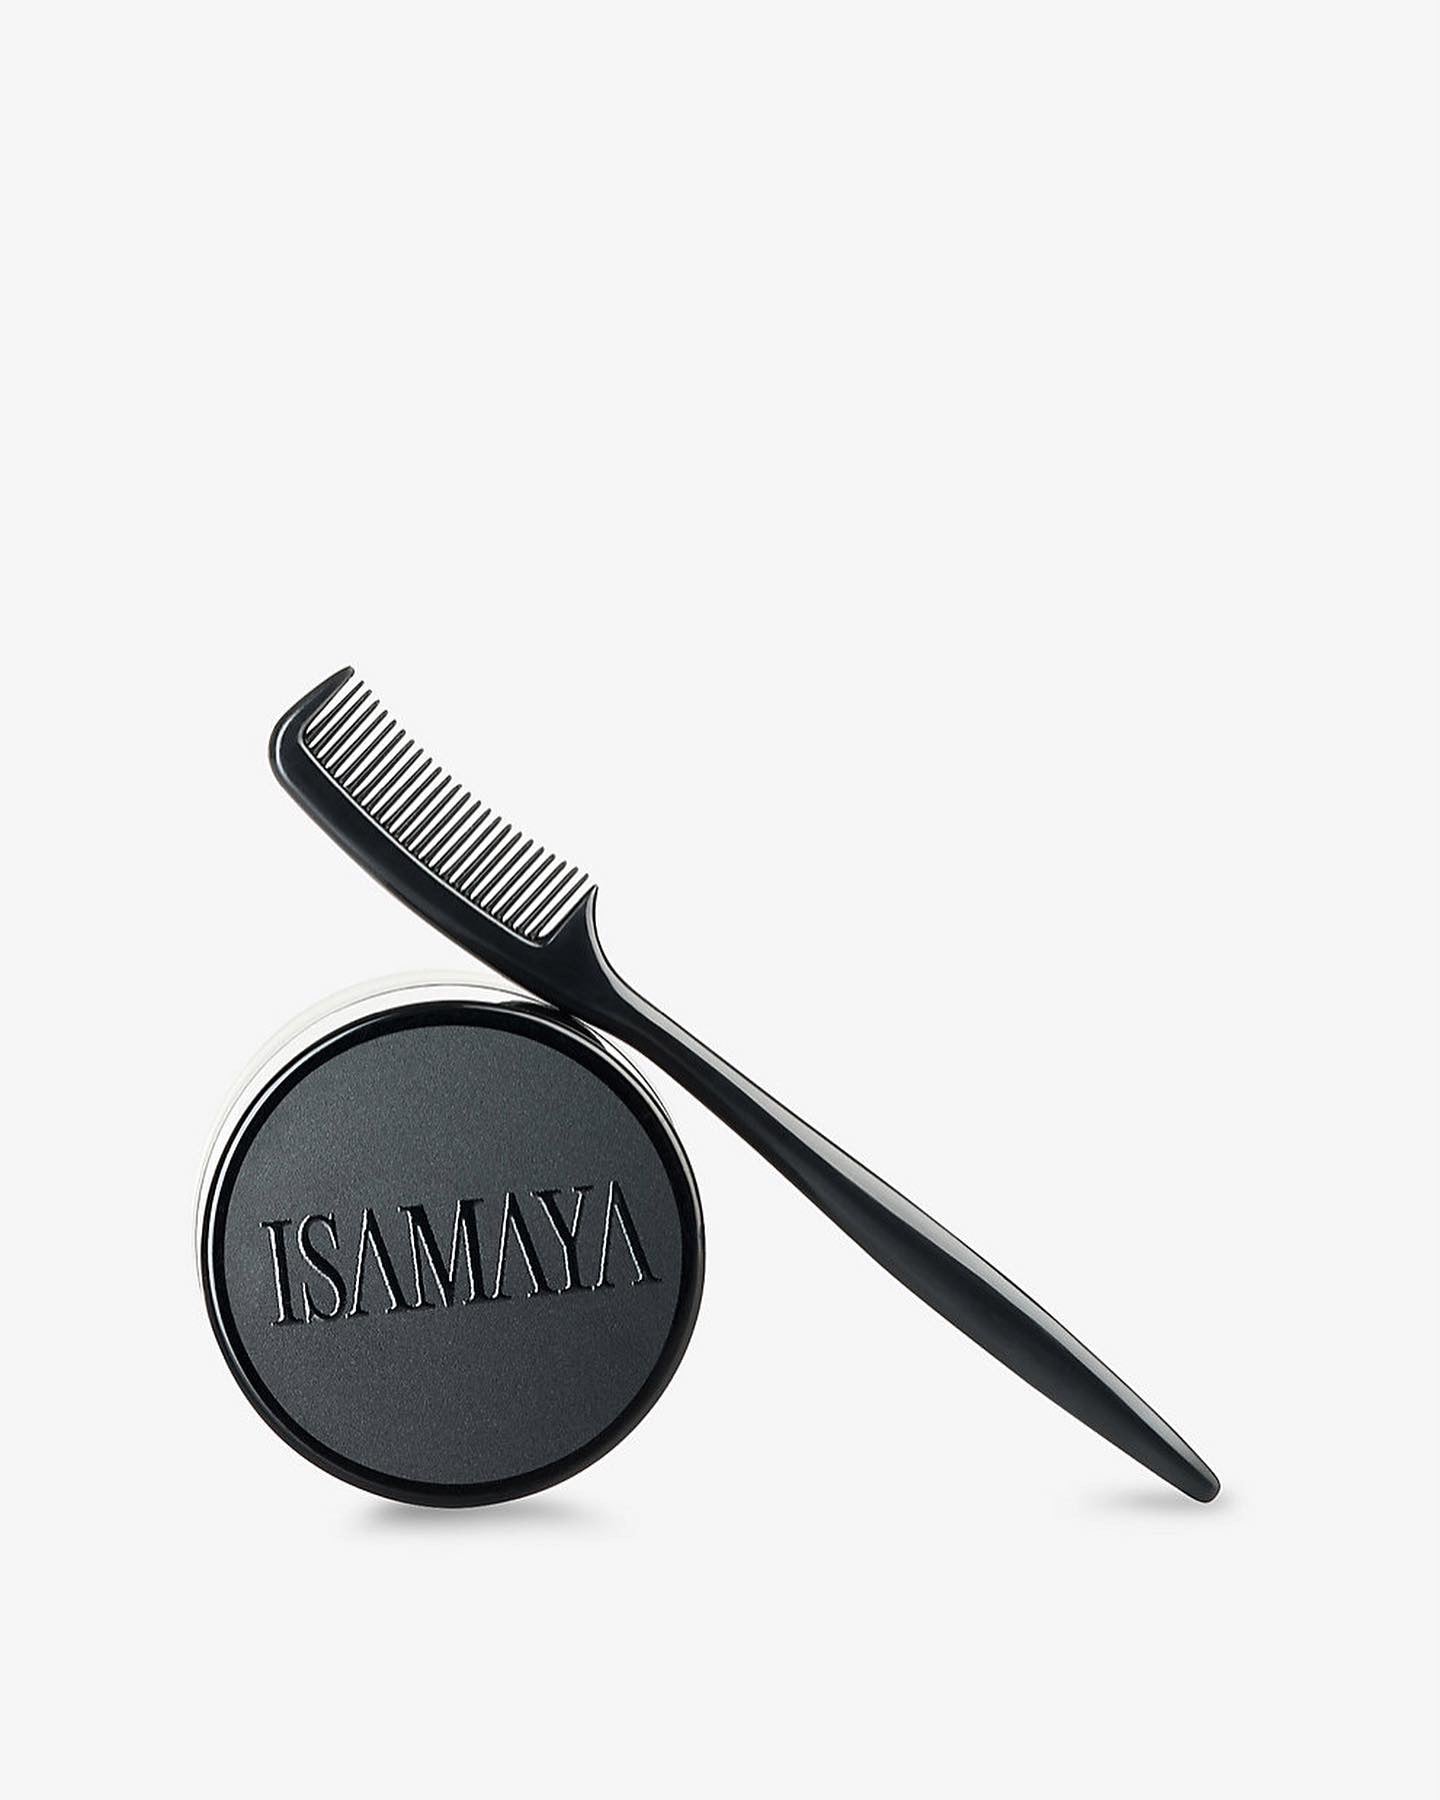 ISAMAYA BEAUTY, THE INDUSTRIAL COLLECTION LIMITED EDITION SET